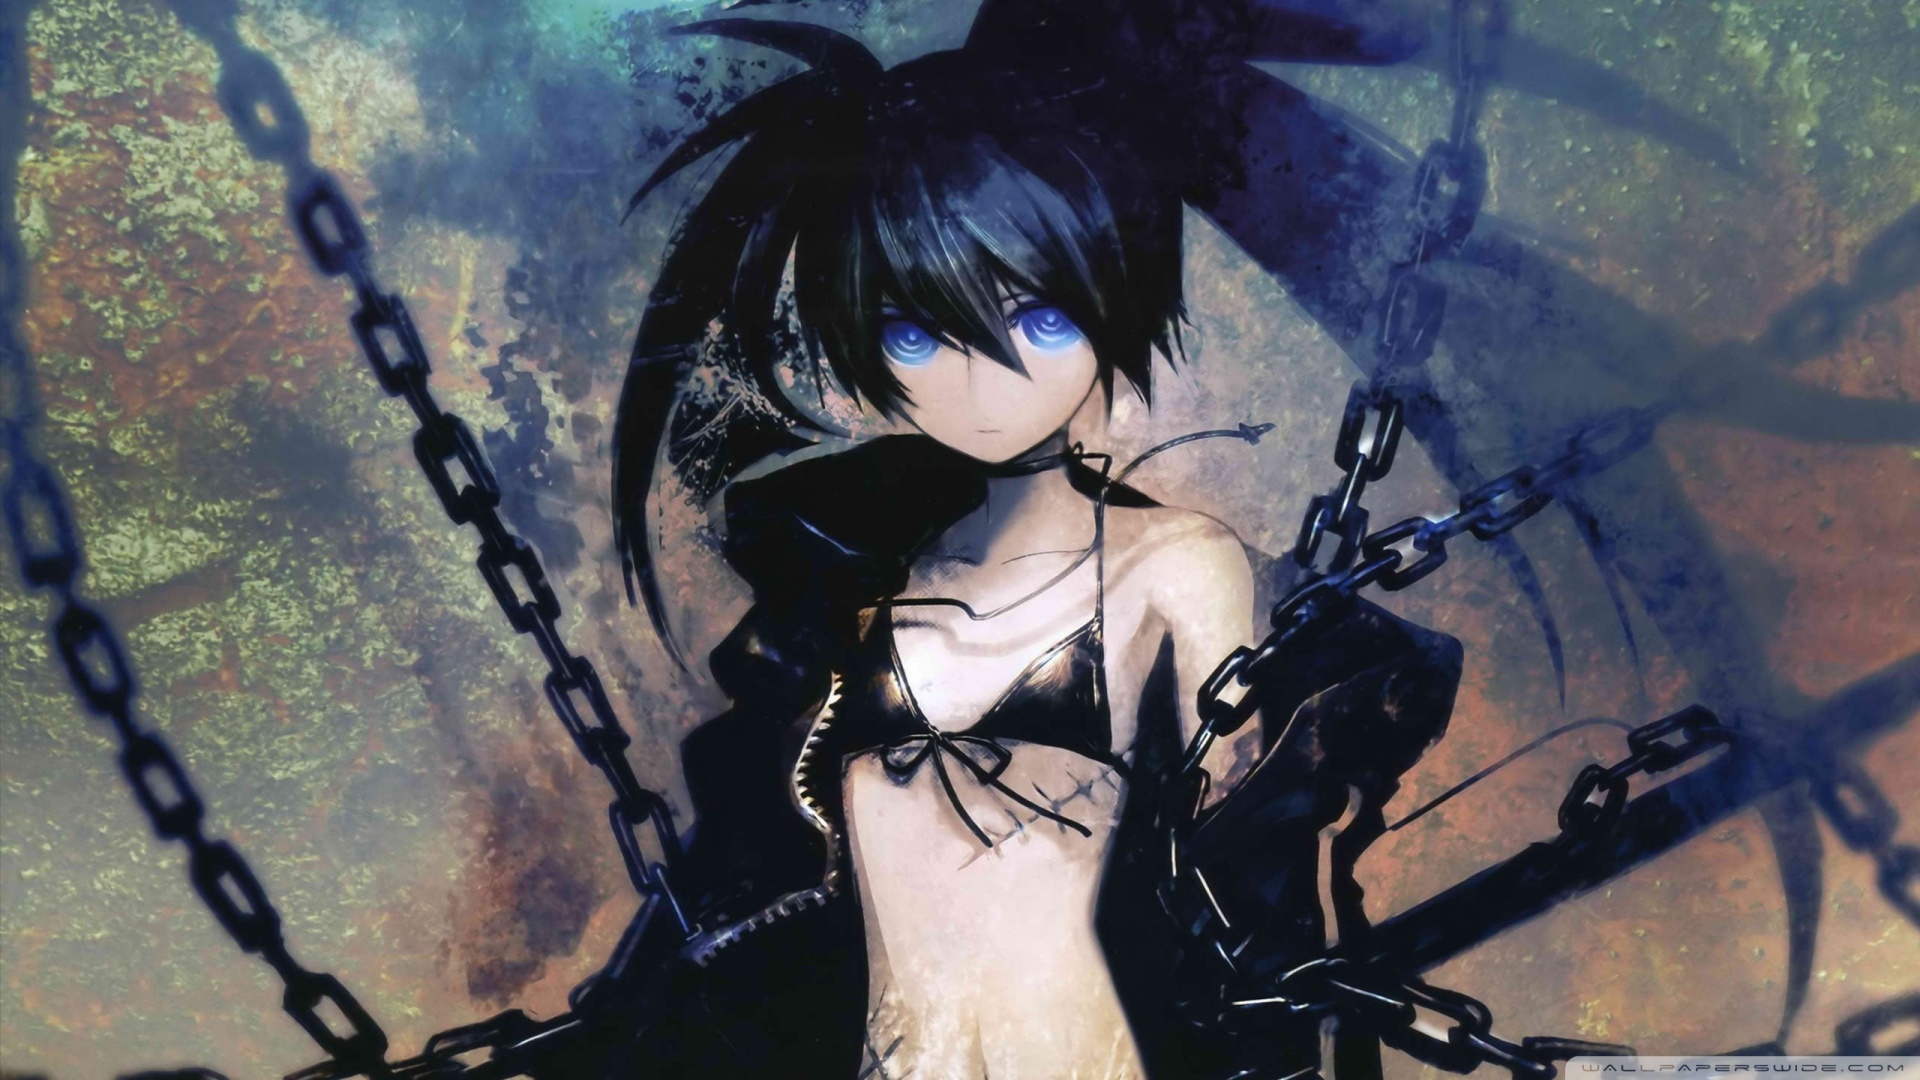 Free download Black Rock Shooter I Wallpaper 1920x1080 Black Rock Shooter I [1920x1080] for your